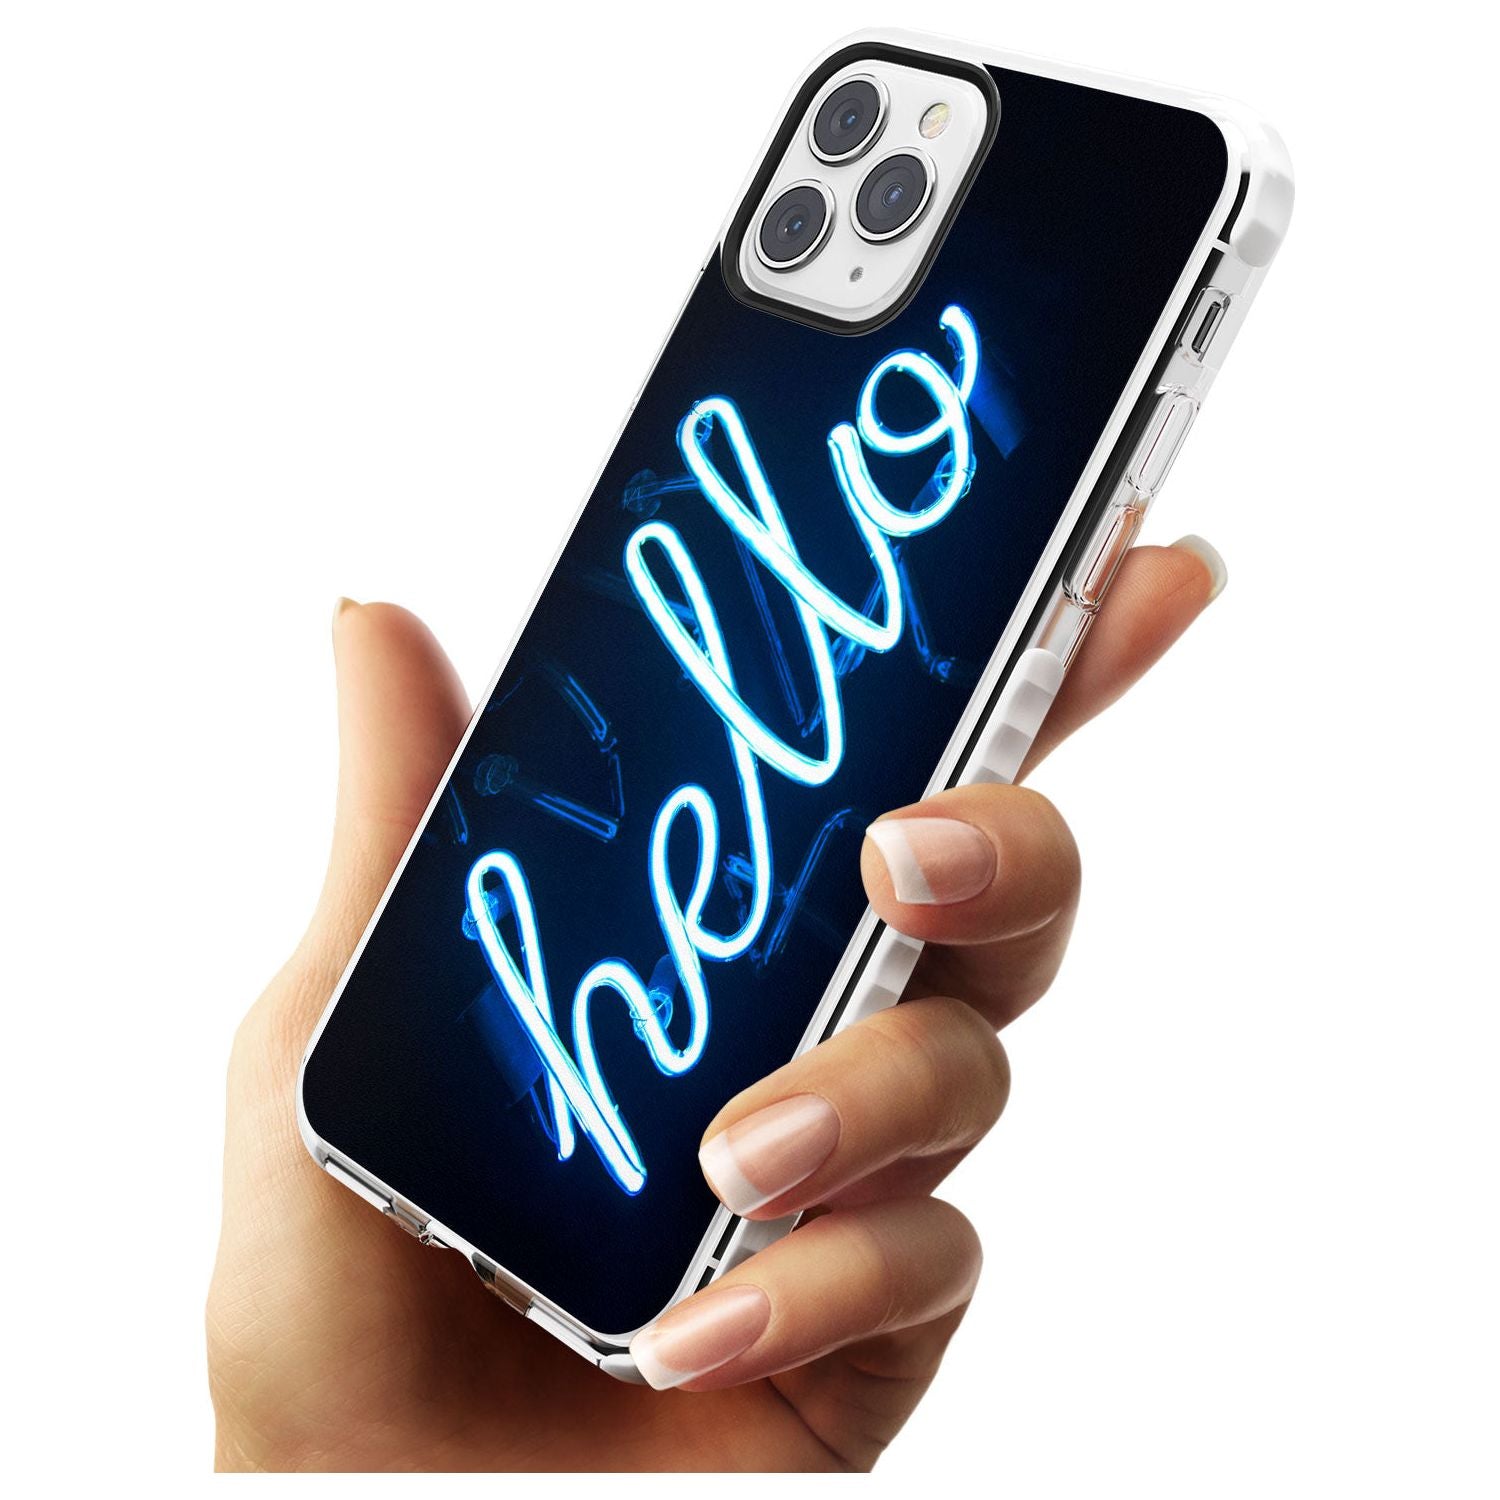 "Hello" Blue Cursive Neon Sign Impact Phone Case for iPhone 11 Pro Max